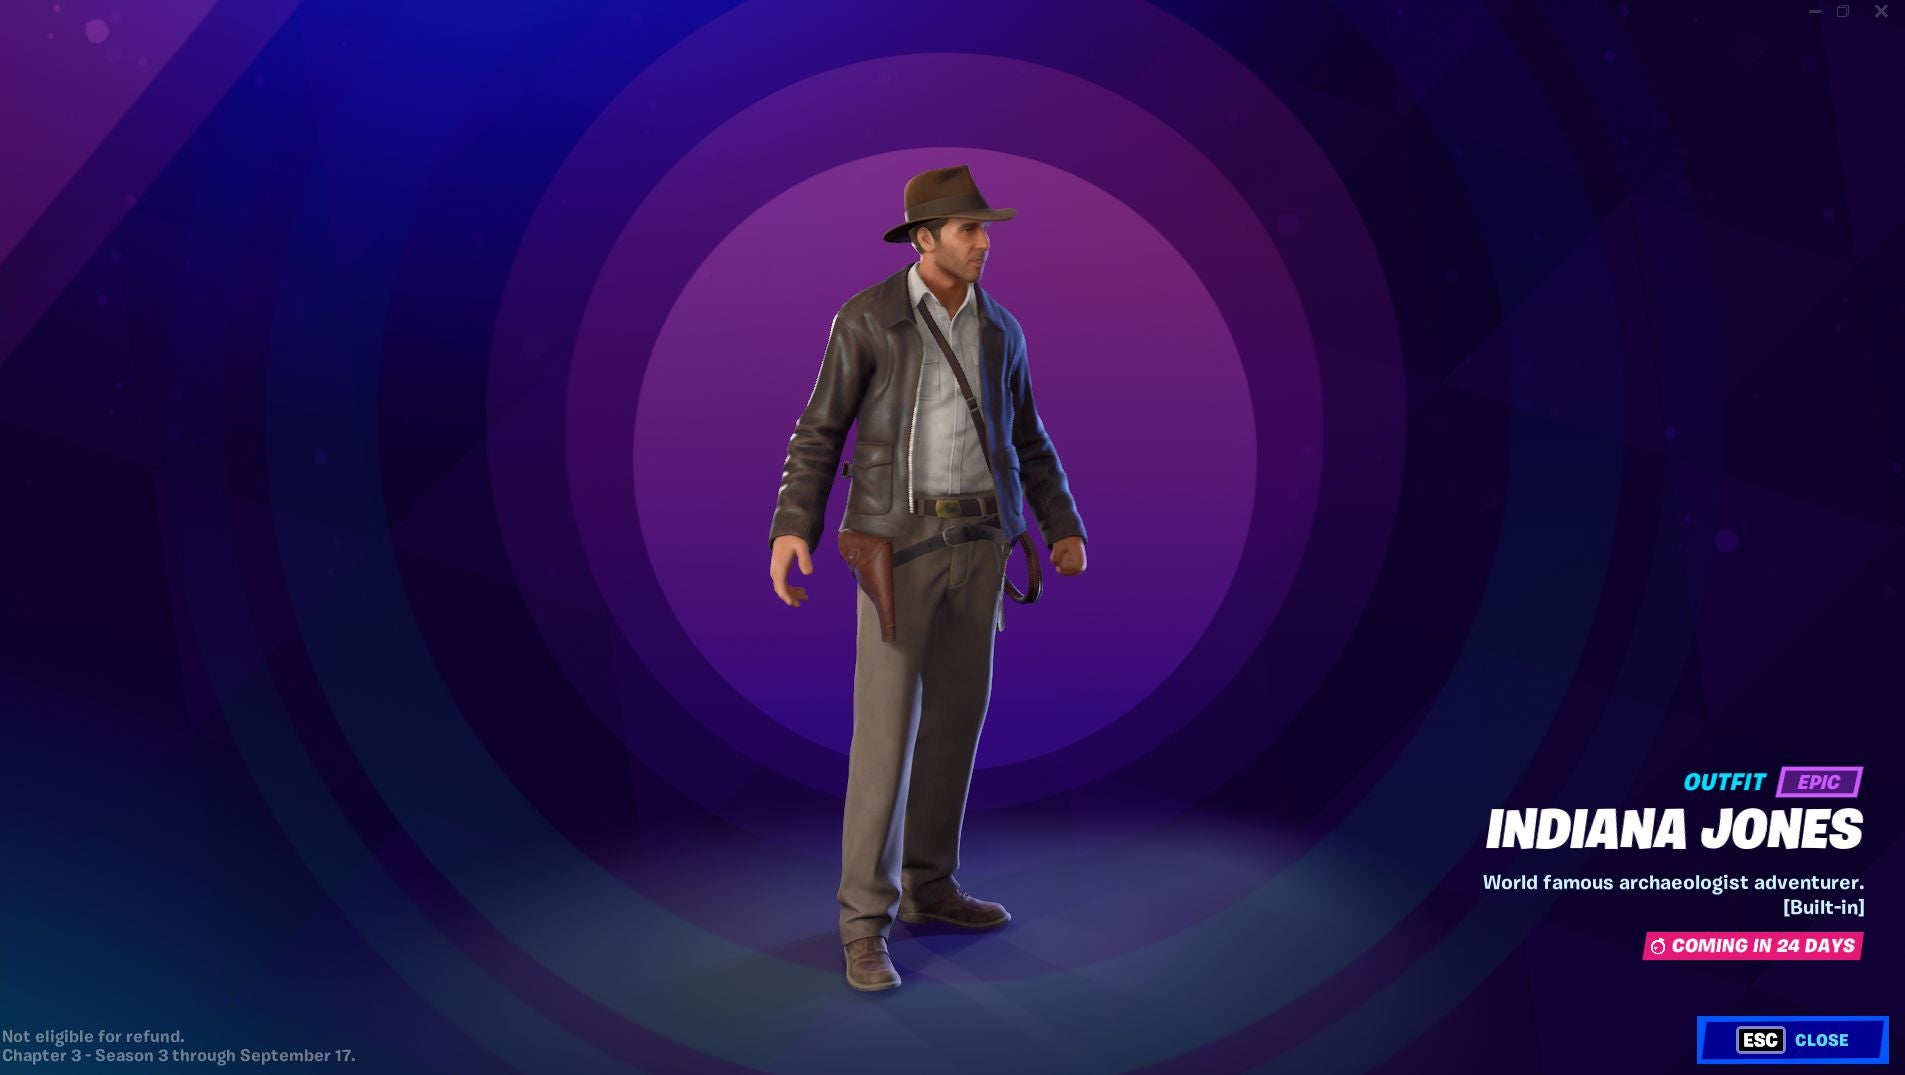 How to get the Fortnite Indiana Jones skin and every Indiana Jones challenge listed - 89